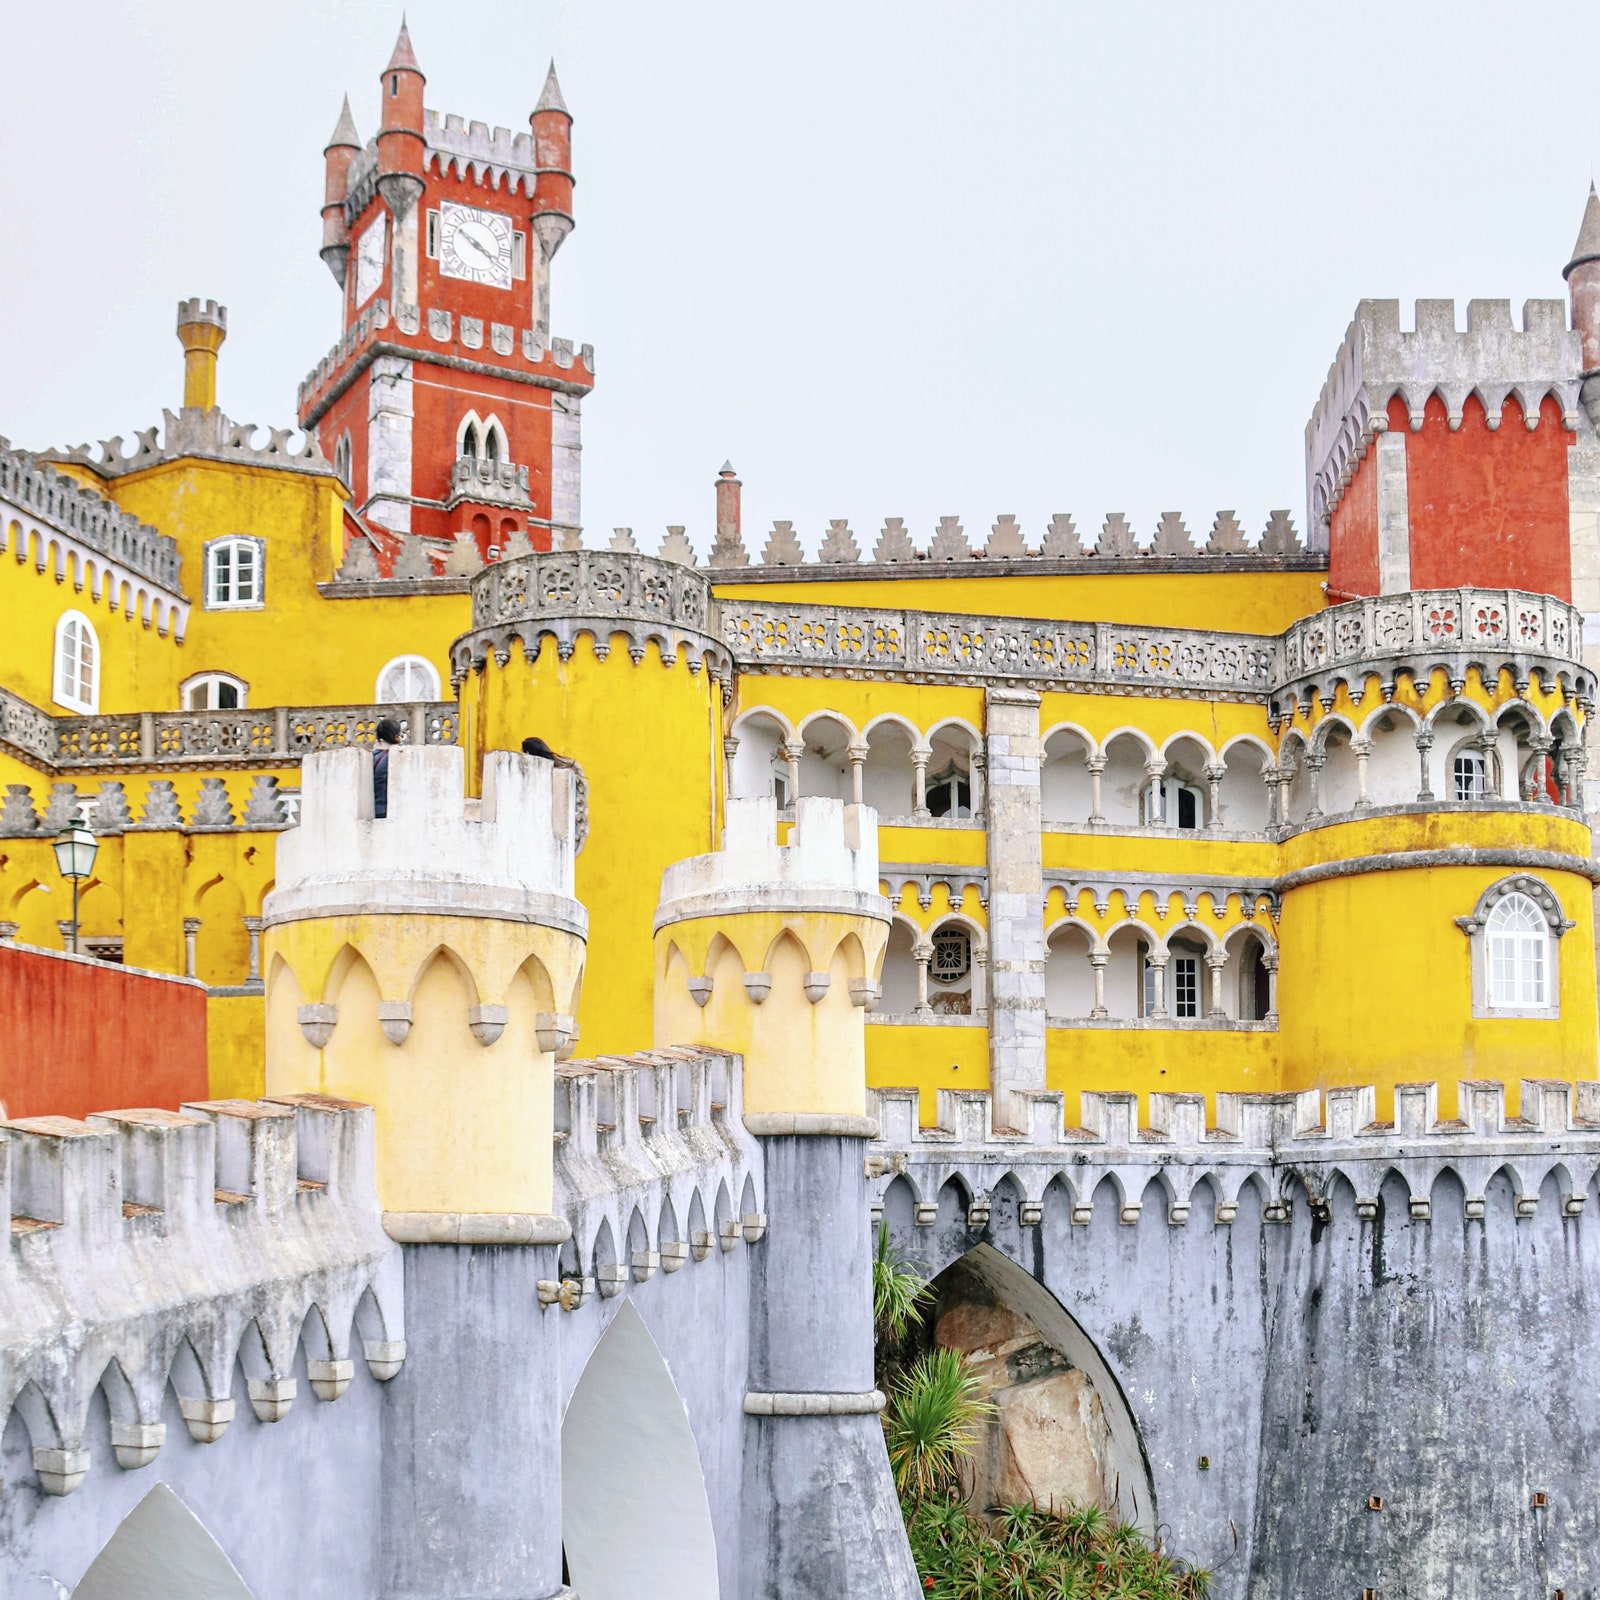 The Vestiges of Southern Portugal's Islamic Empire